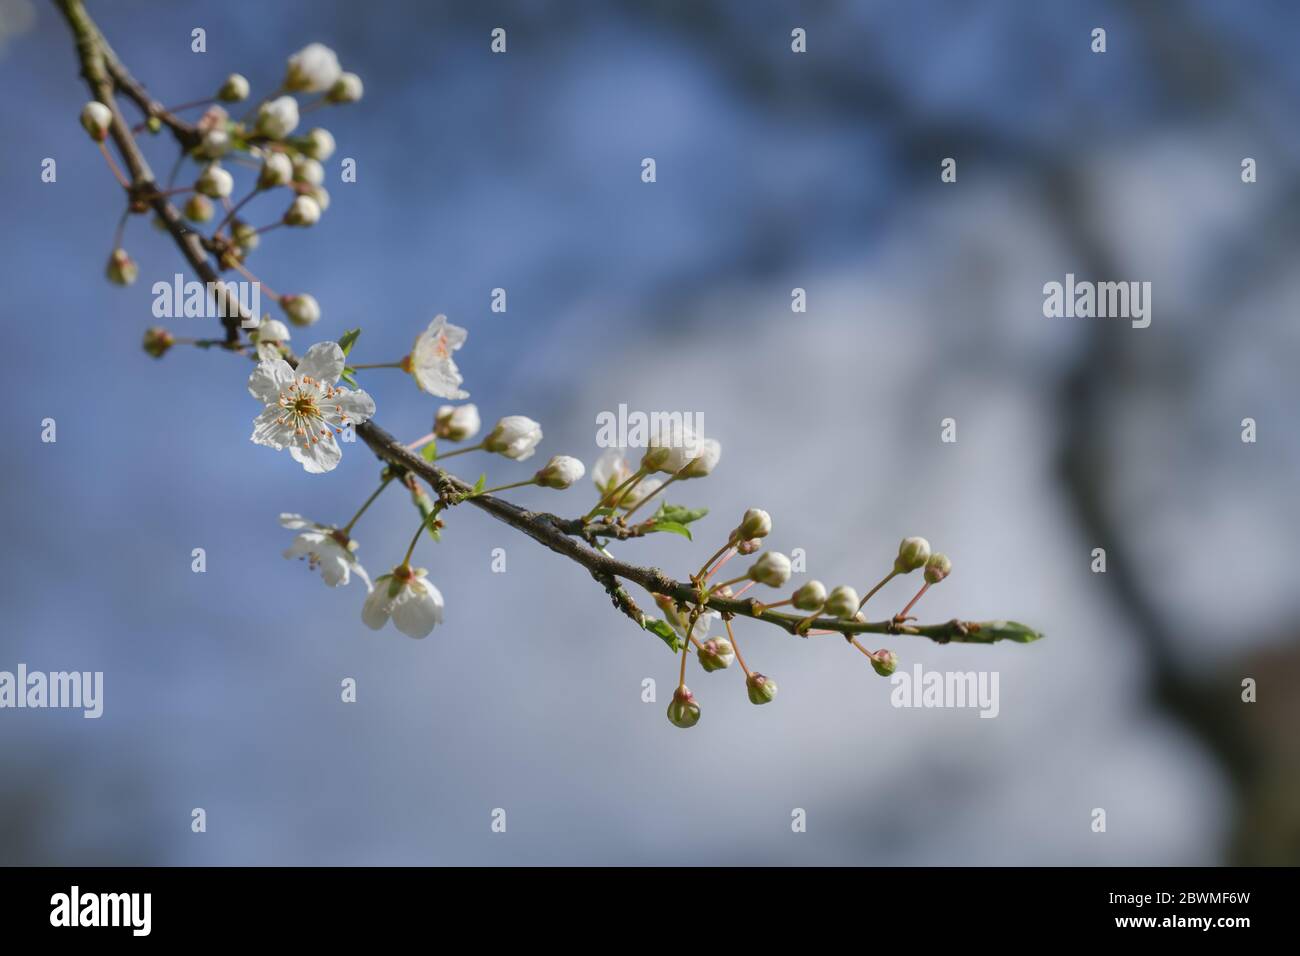 Blossoming cherry plum tree (Prunus cerasifera) with small white flowers in spring or Easter time against a blue sky, copy space, selected focus, narr Stock Photo